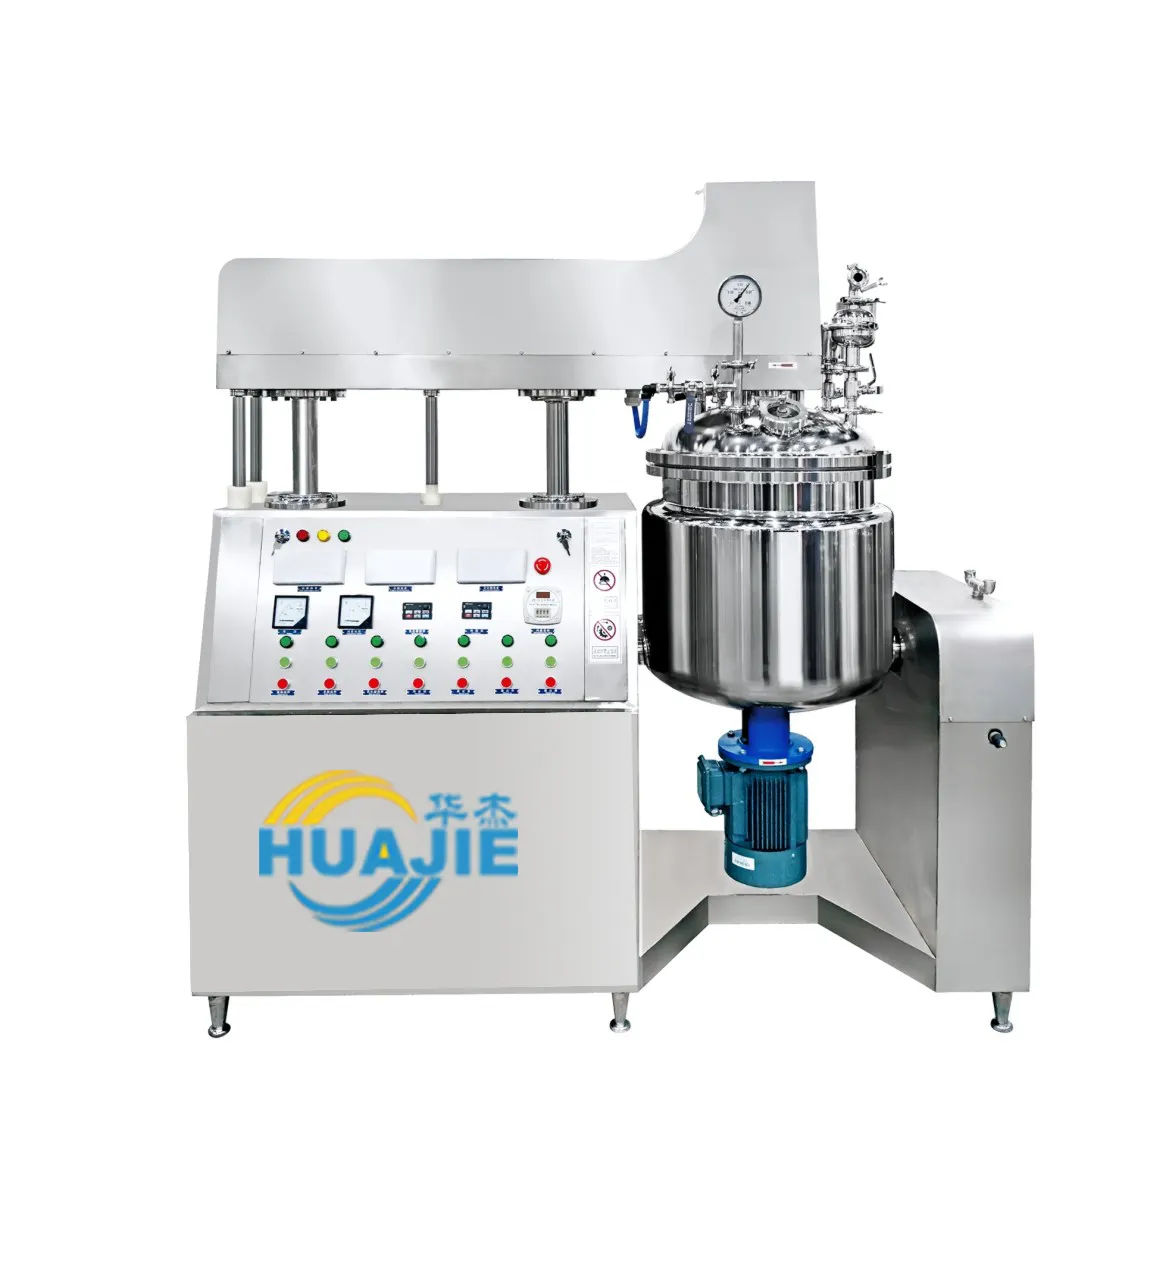 HUAJIE Stainless Steel Triple Jackets Vacuum Emulsifier Mixer With Oil And Water Tank ointment Making Machine